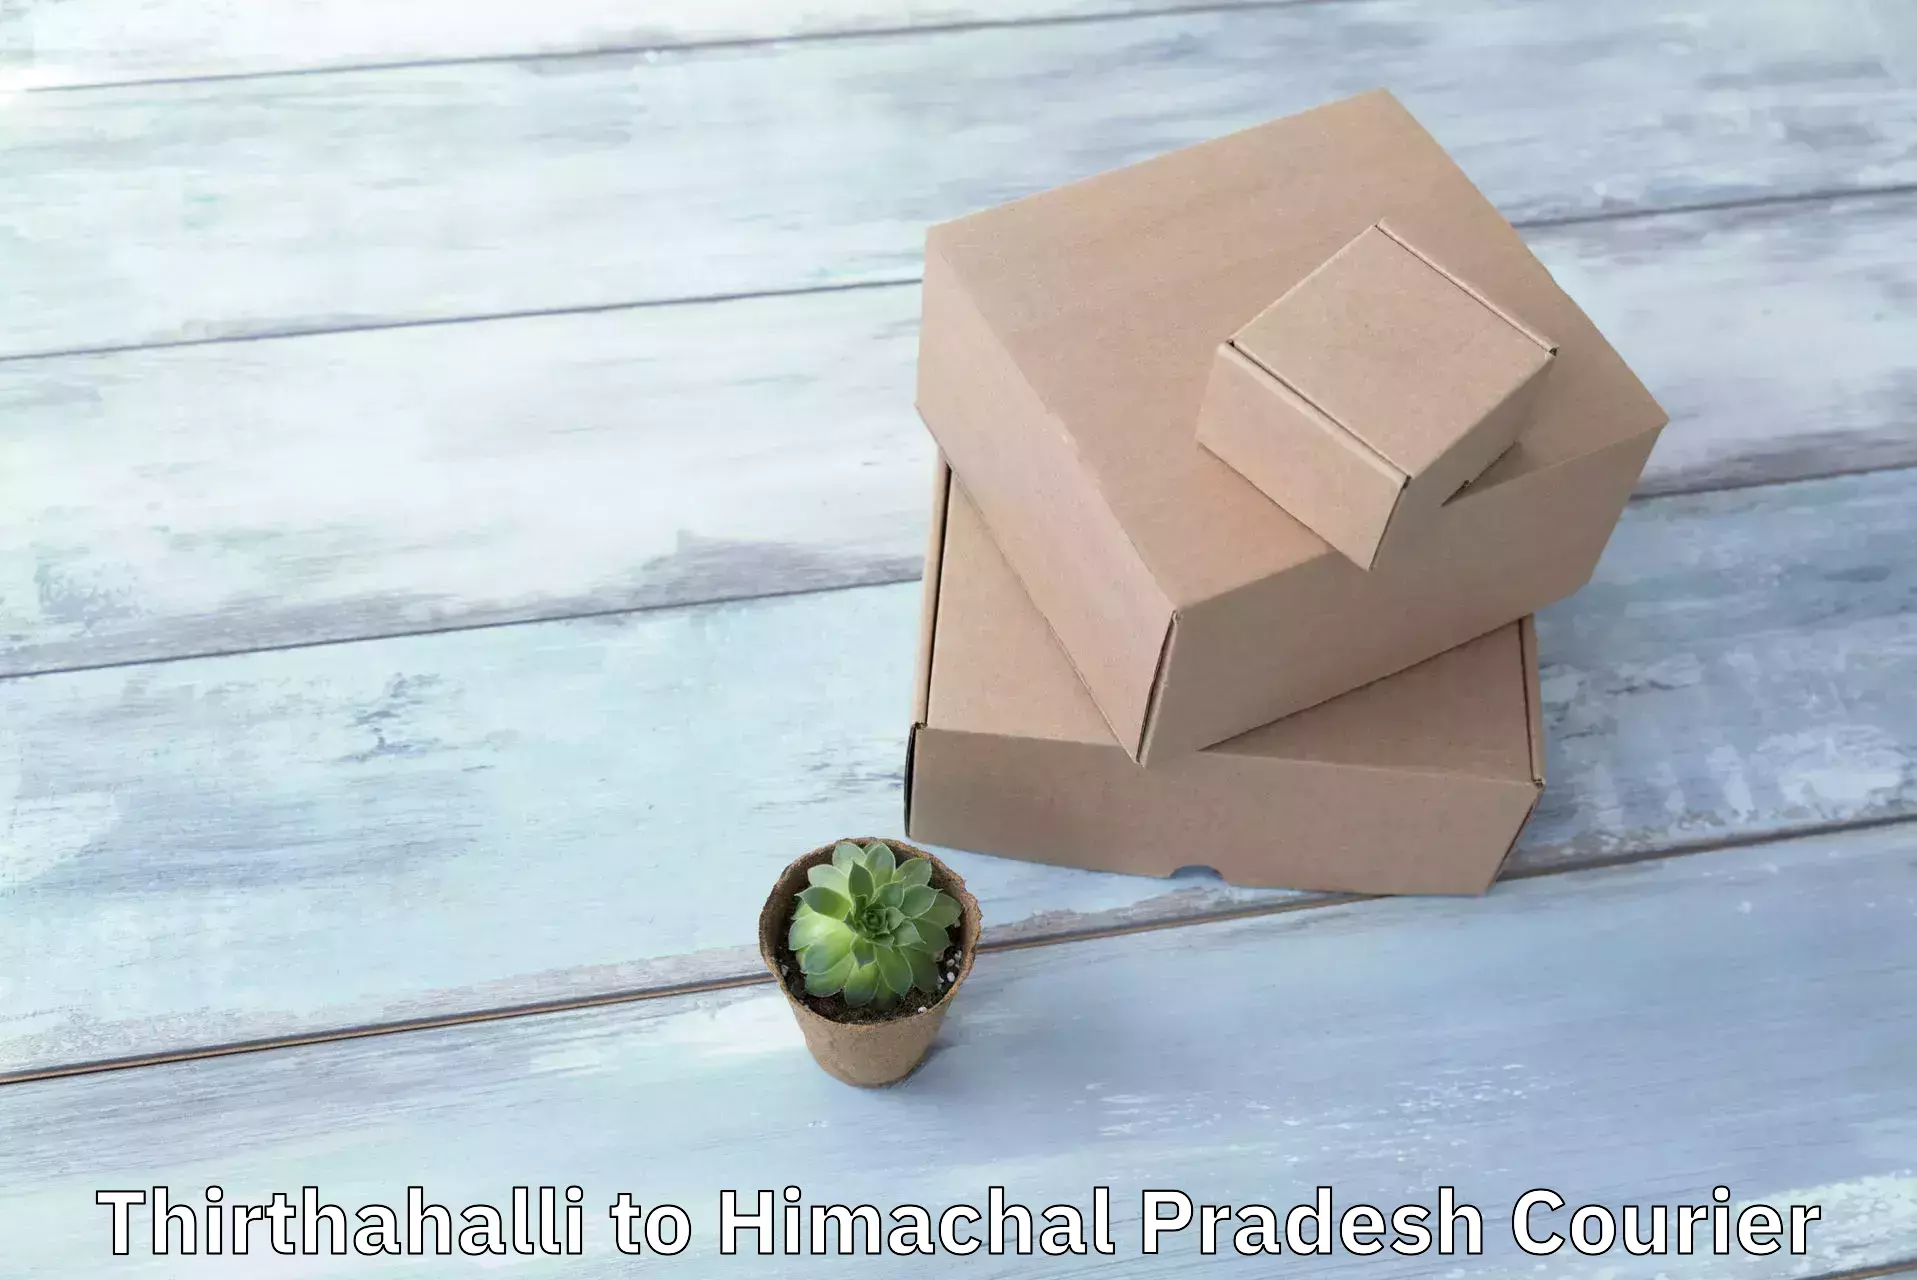 Quality courier partnerships in Thirthahalli to Himachal Pradesh